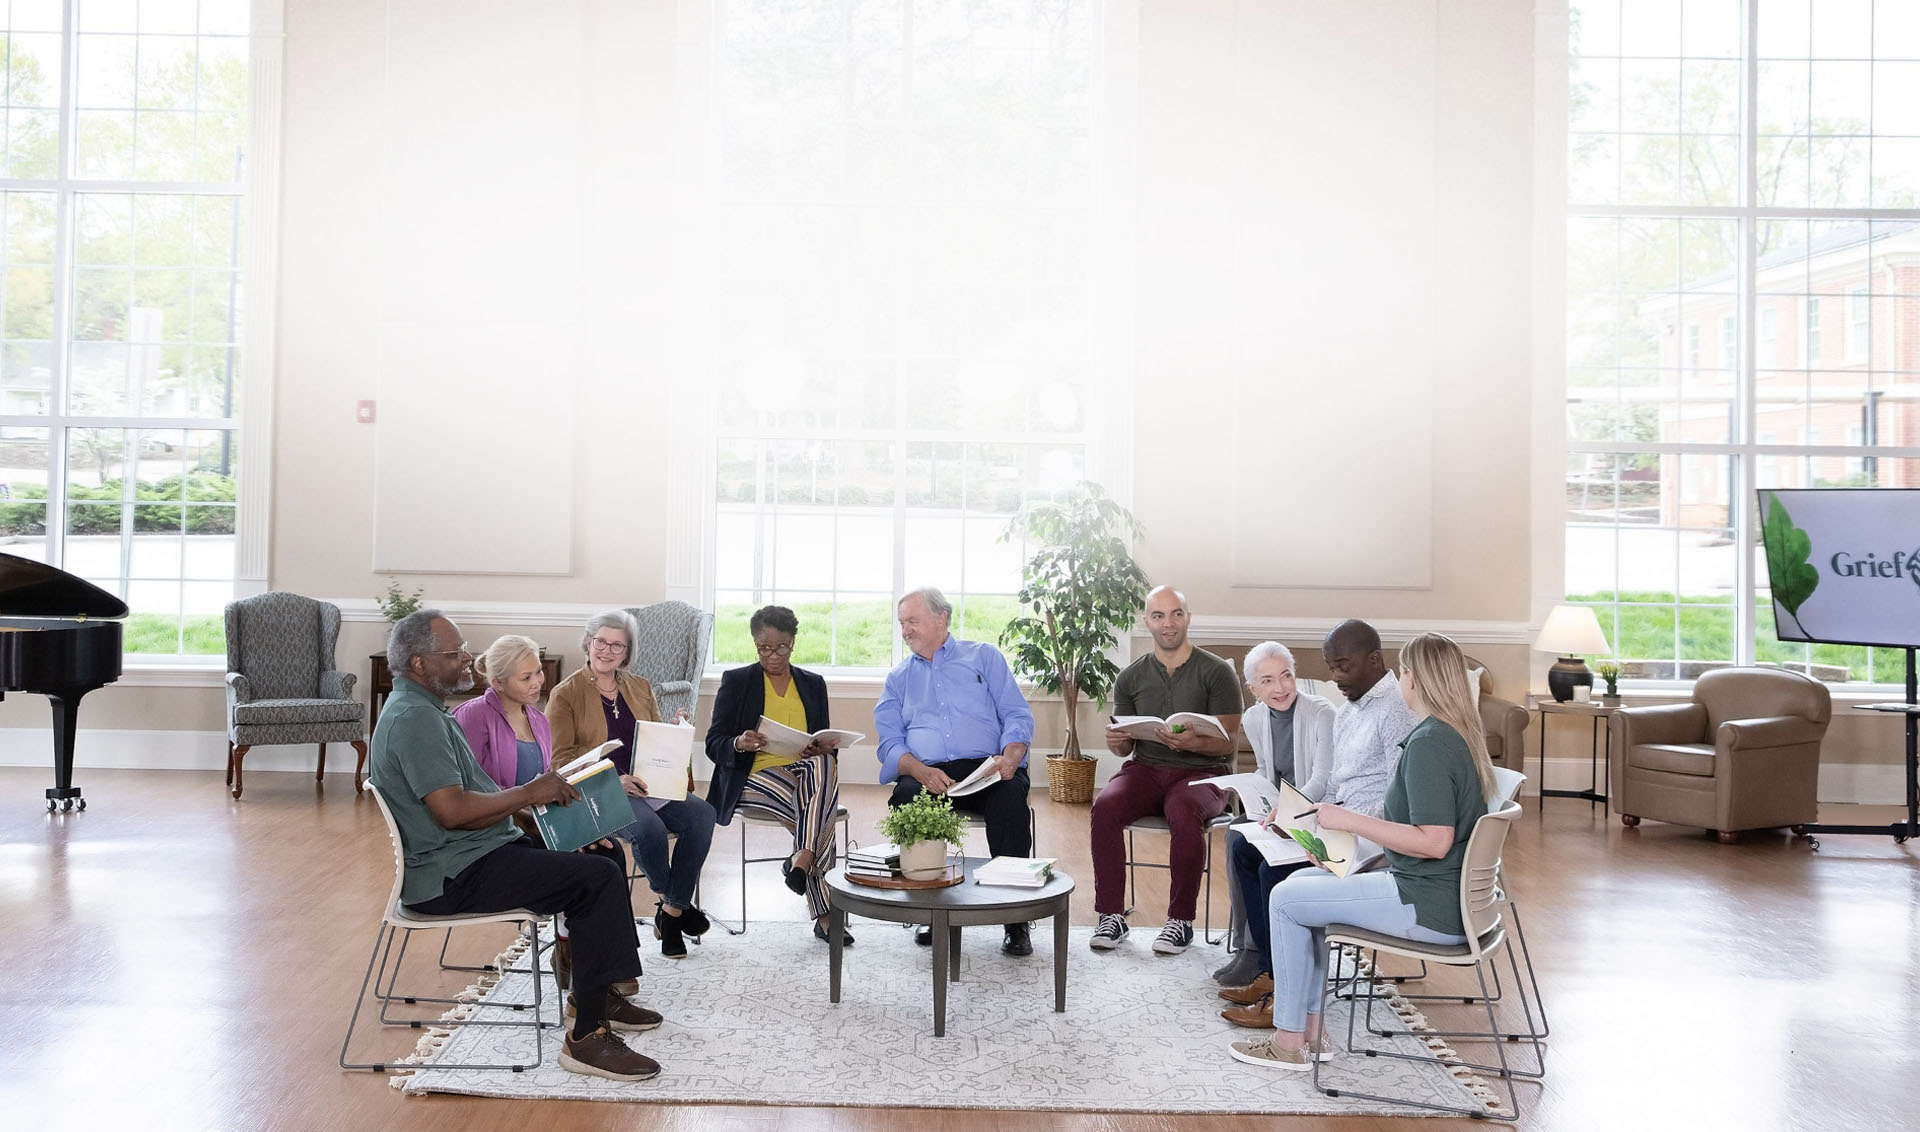 A diverse group of people sit together at a GriefShare support group. They are holding workbooks and warmly interacting.